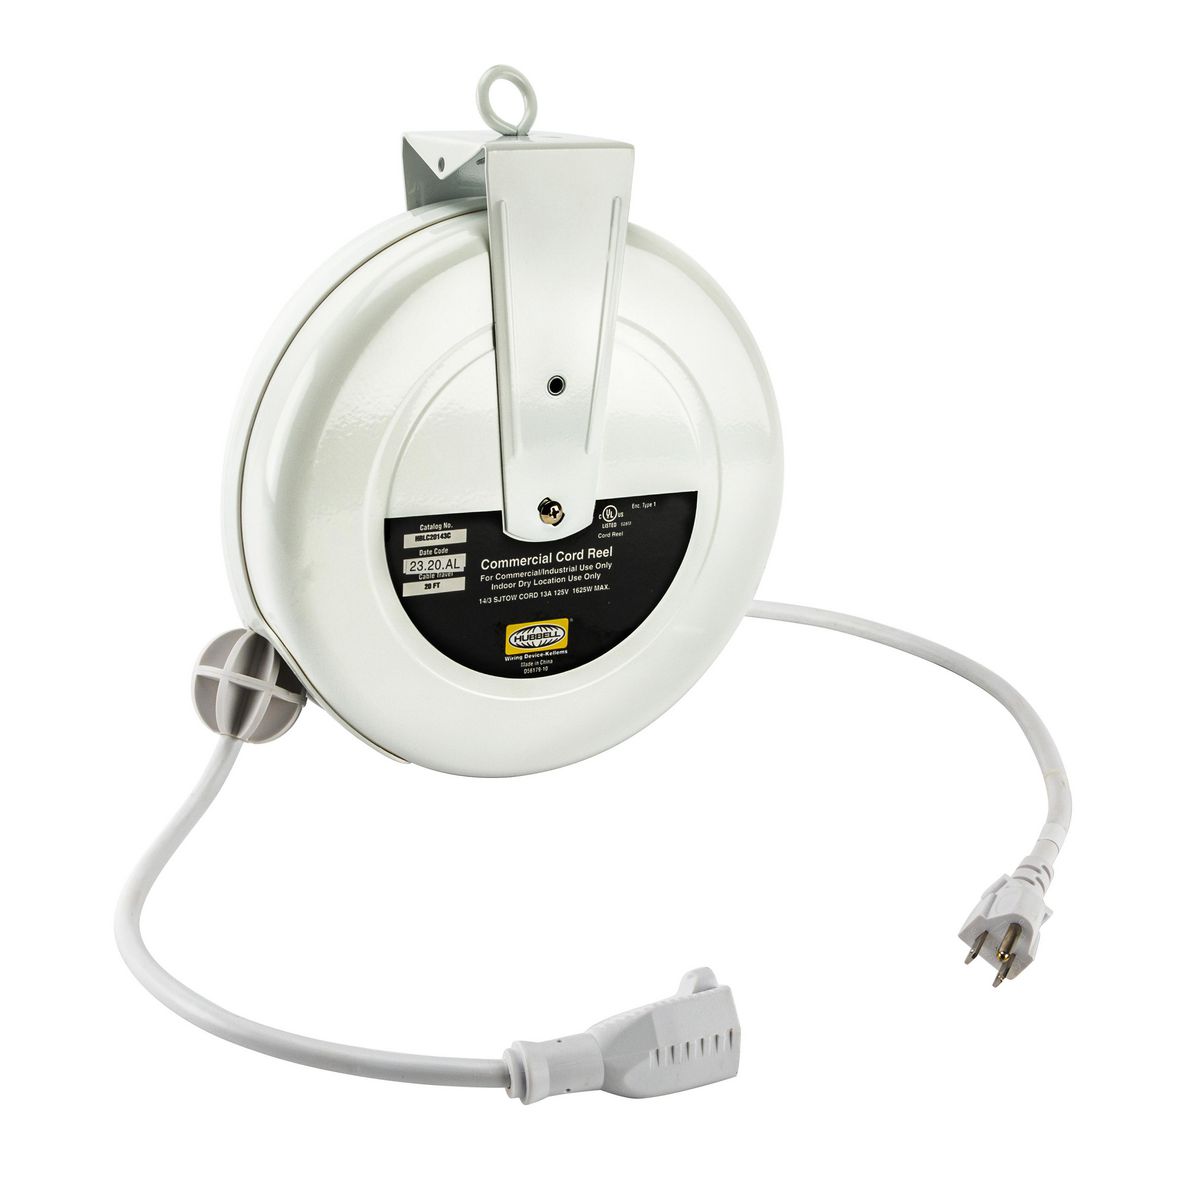 White commercial cord reel with single outlet